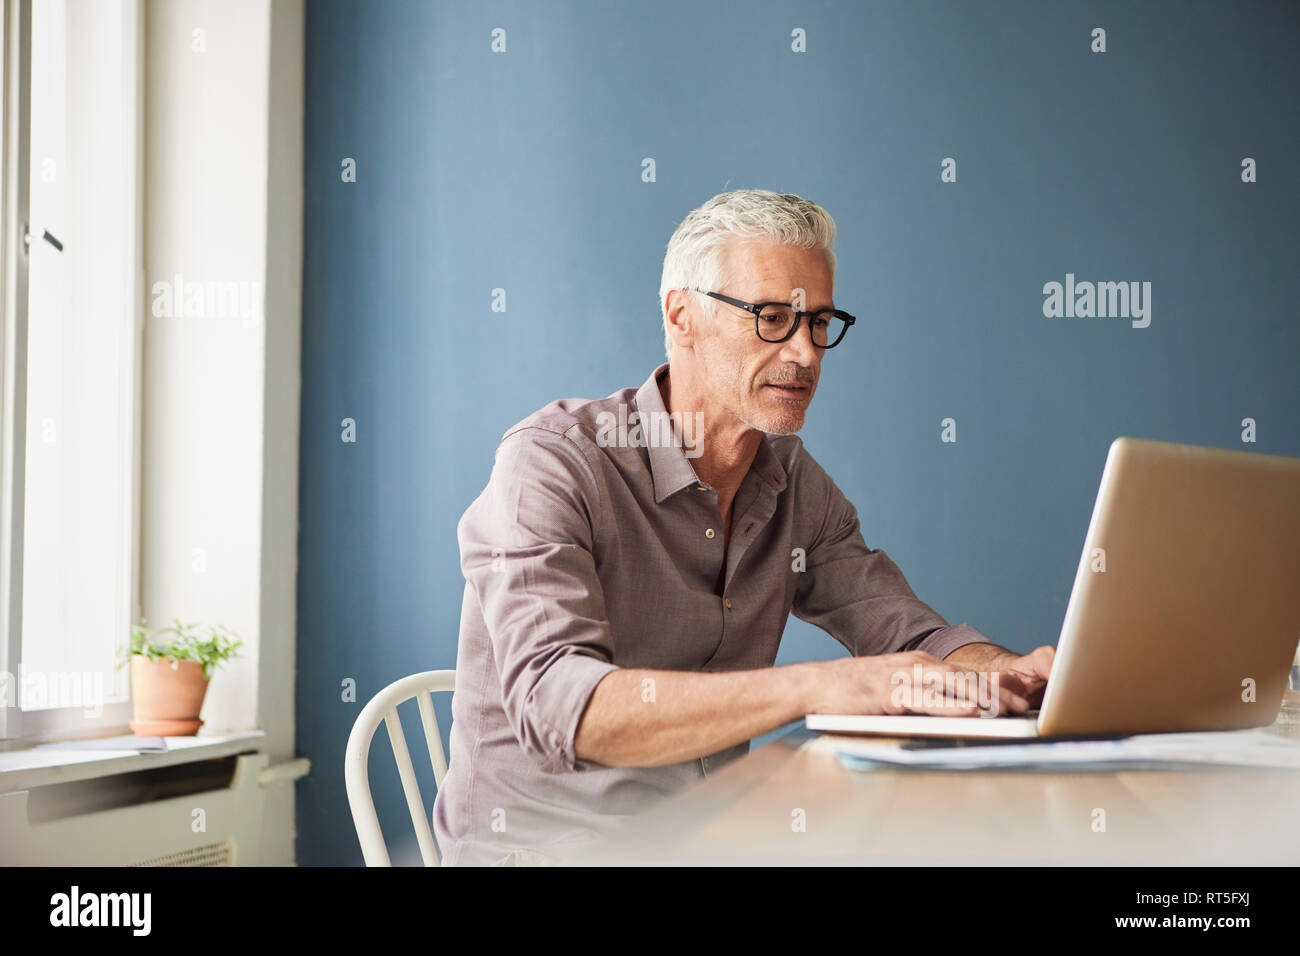 Mature man using laptop on table at home Stock Photo